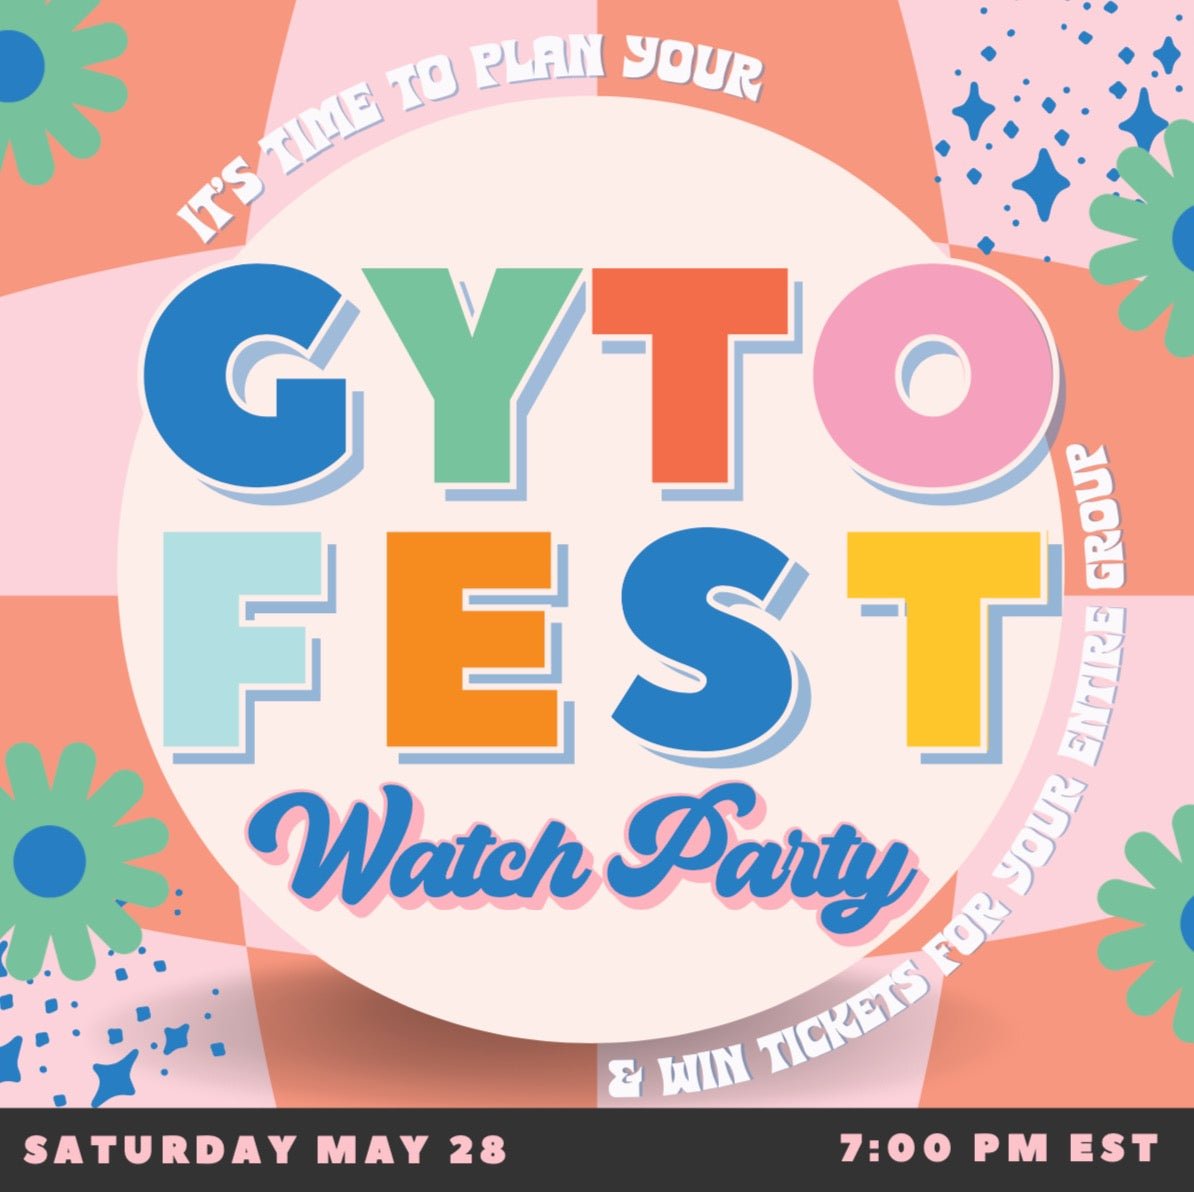 GYTO Fest Watch Party Planning Kit